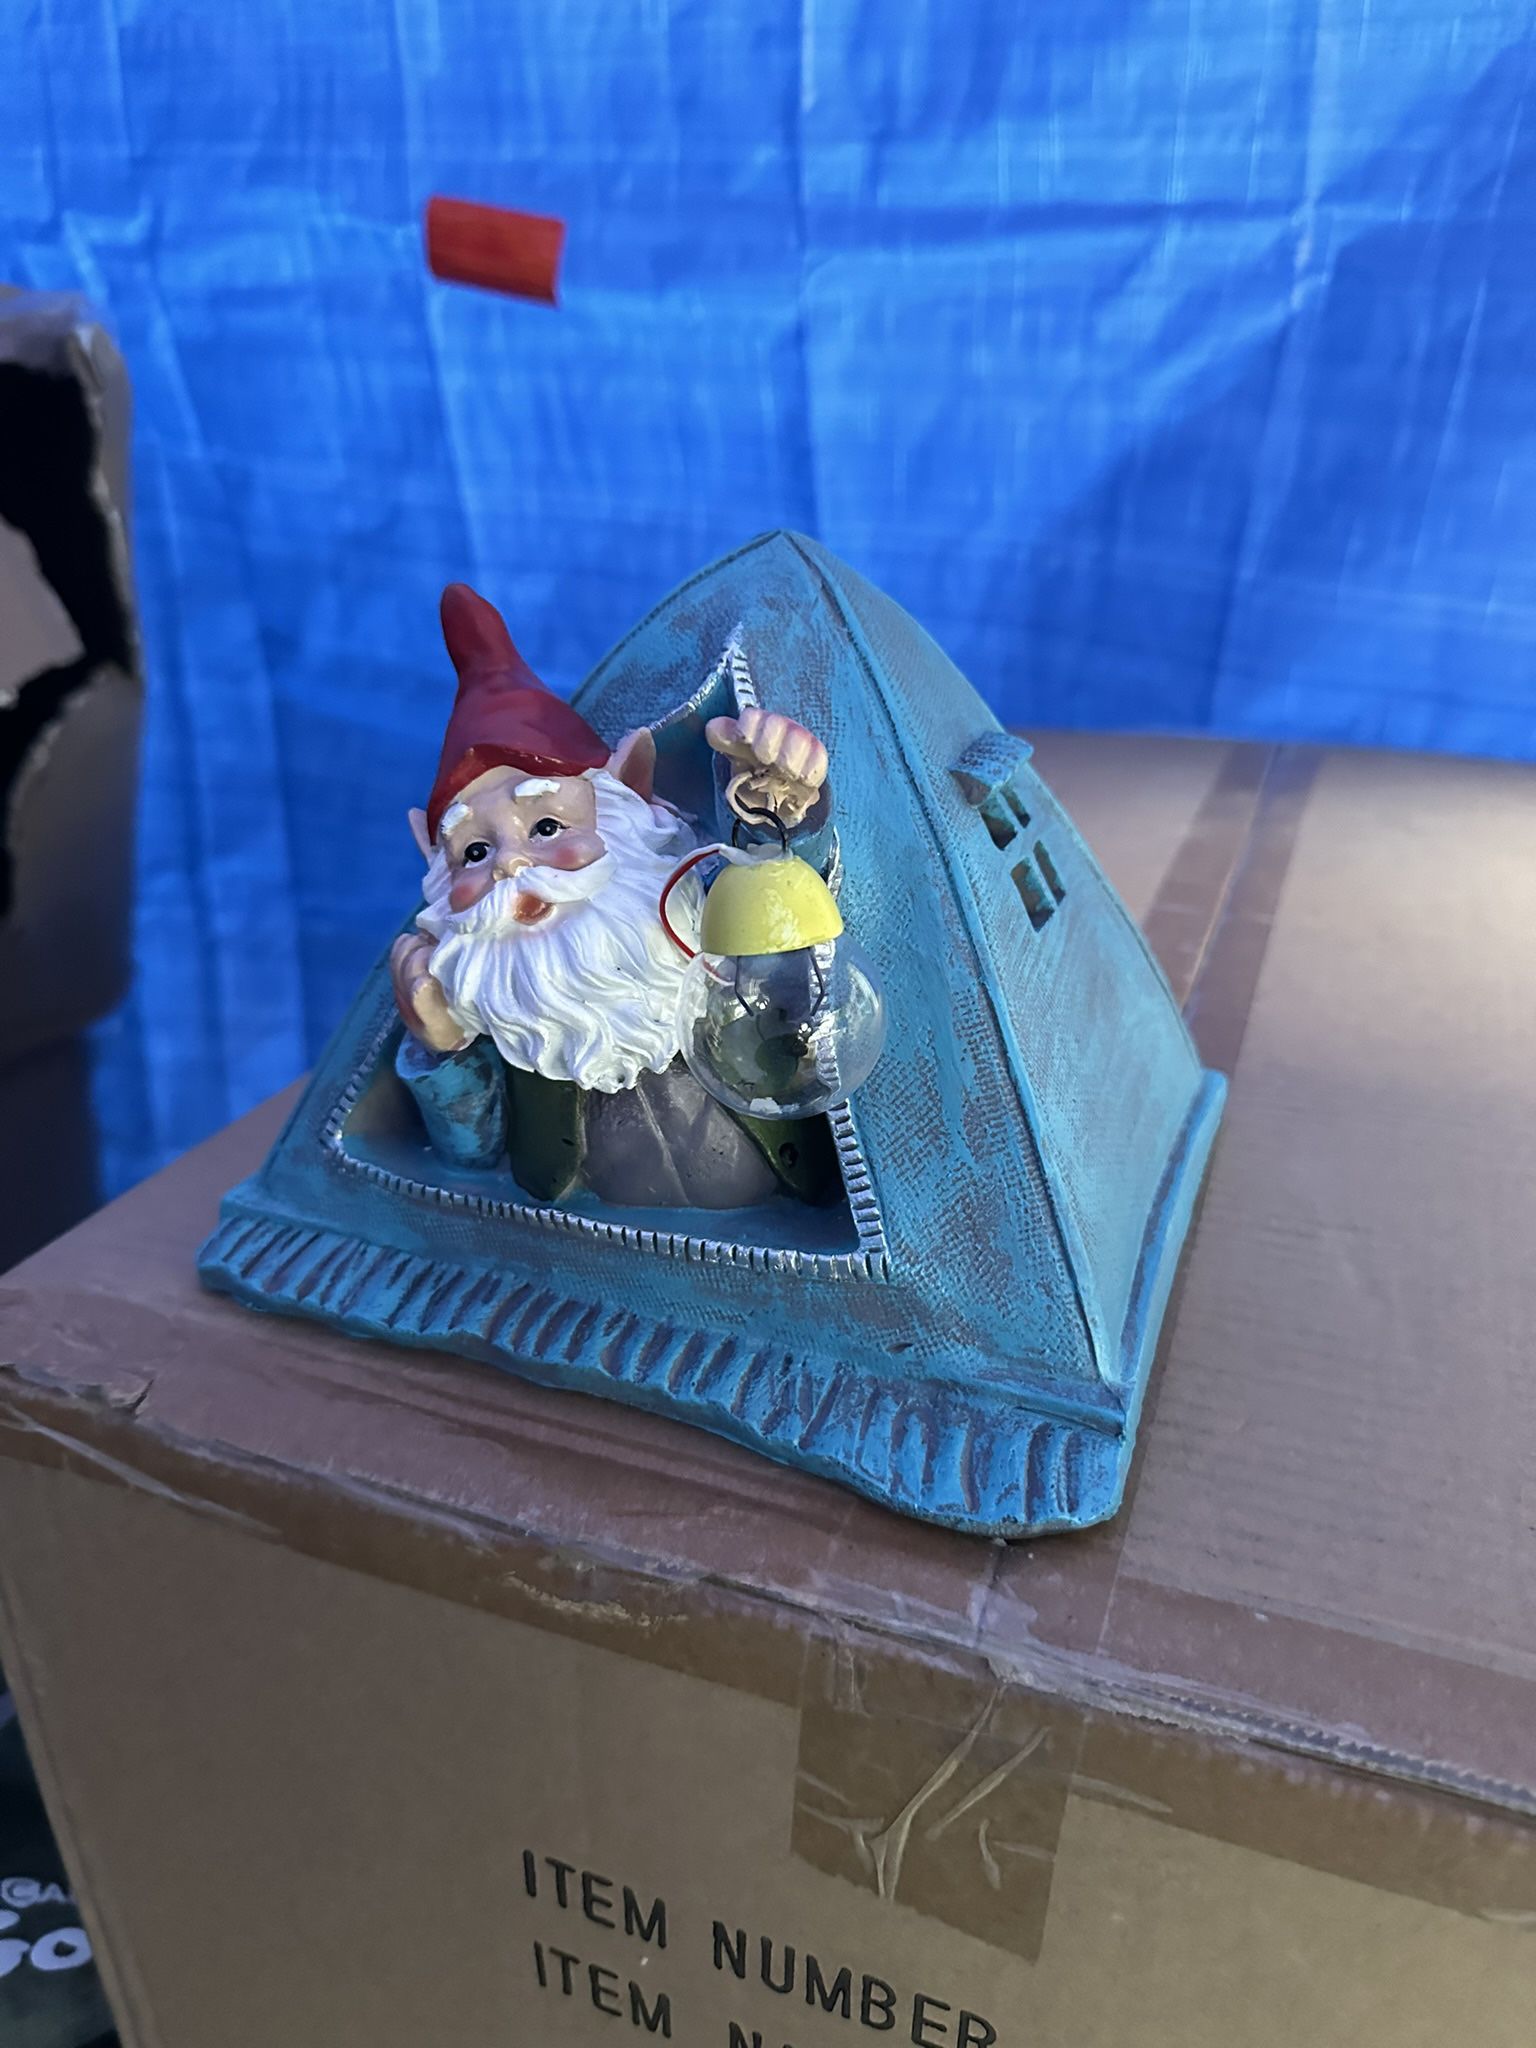 Gnome Yard Decorations, Patio Items, and Other Misc Items For Sale 